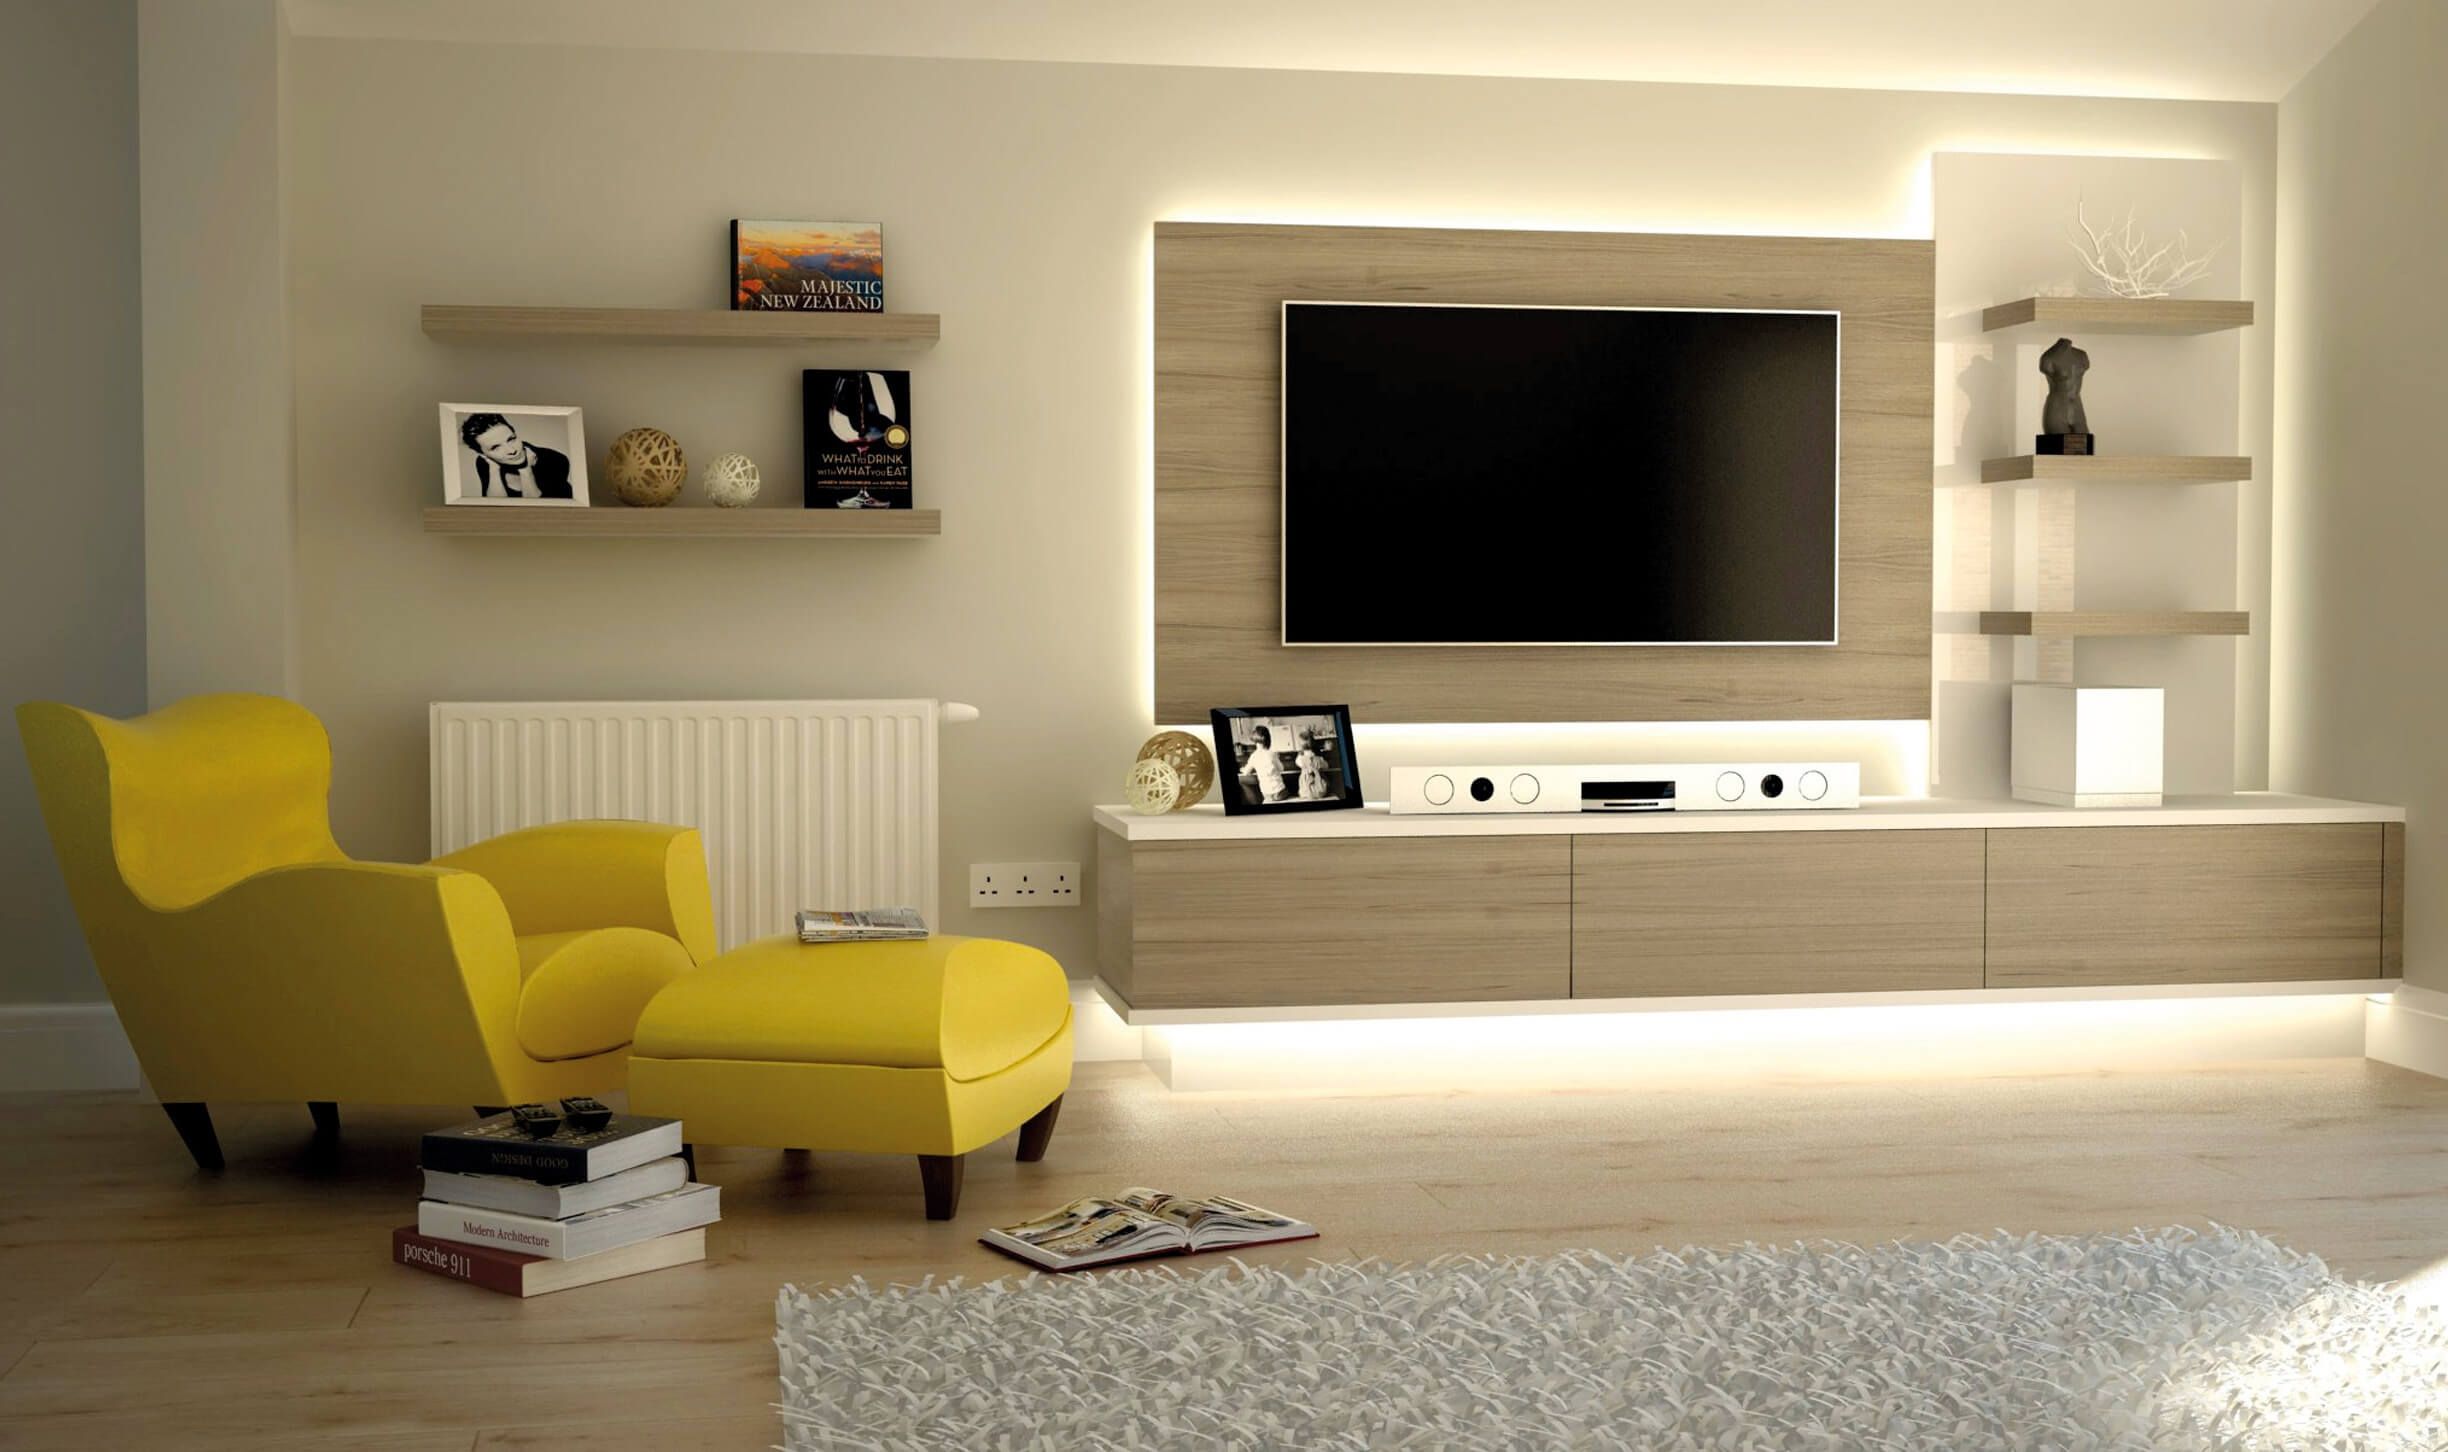 Bespoke Tv Cabinets Bookcases And Storage Units For Over 50 Within Living Room Fitted Cabinets (View 3 of 15)